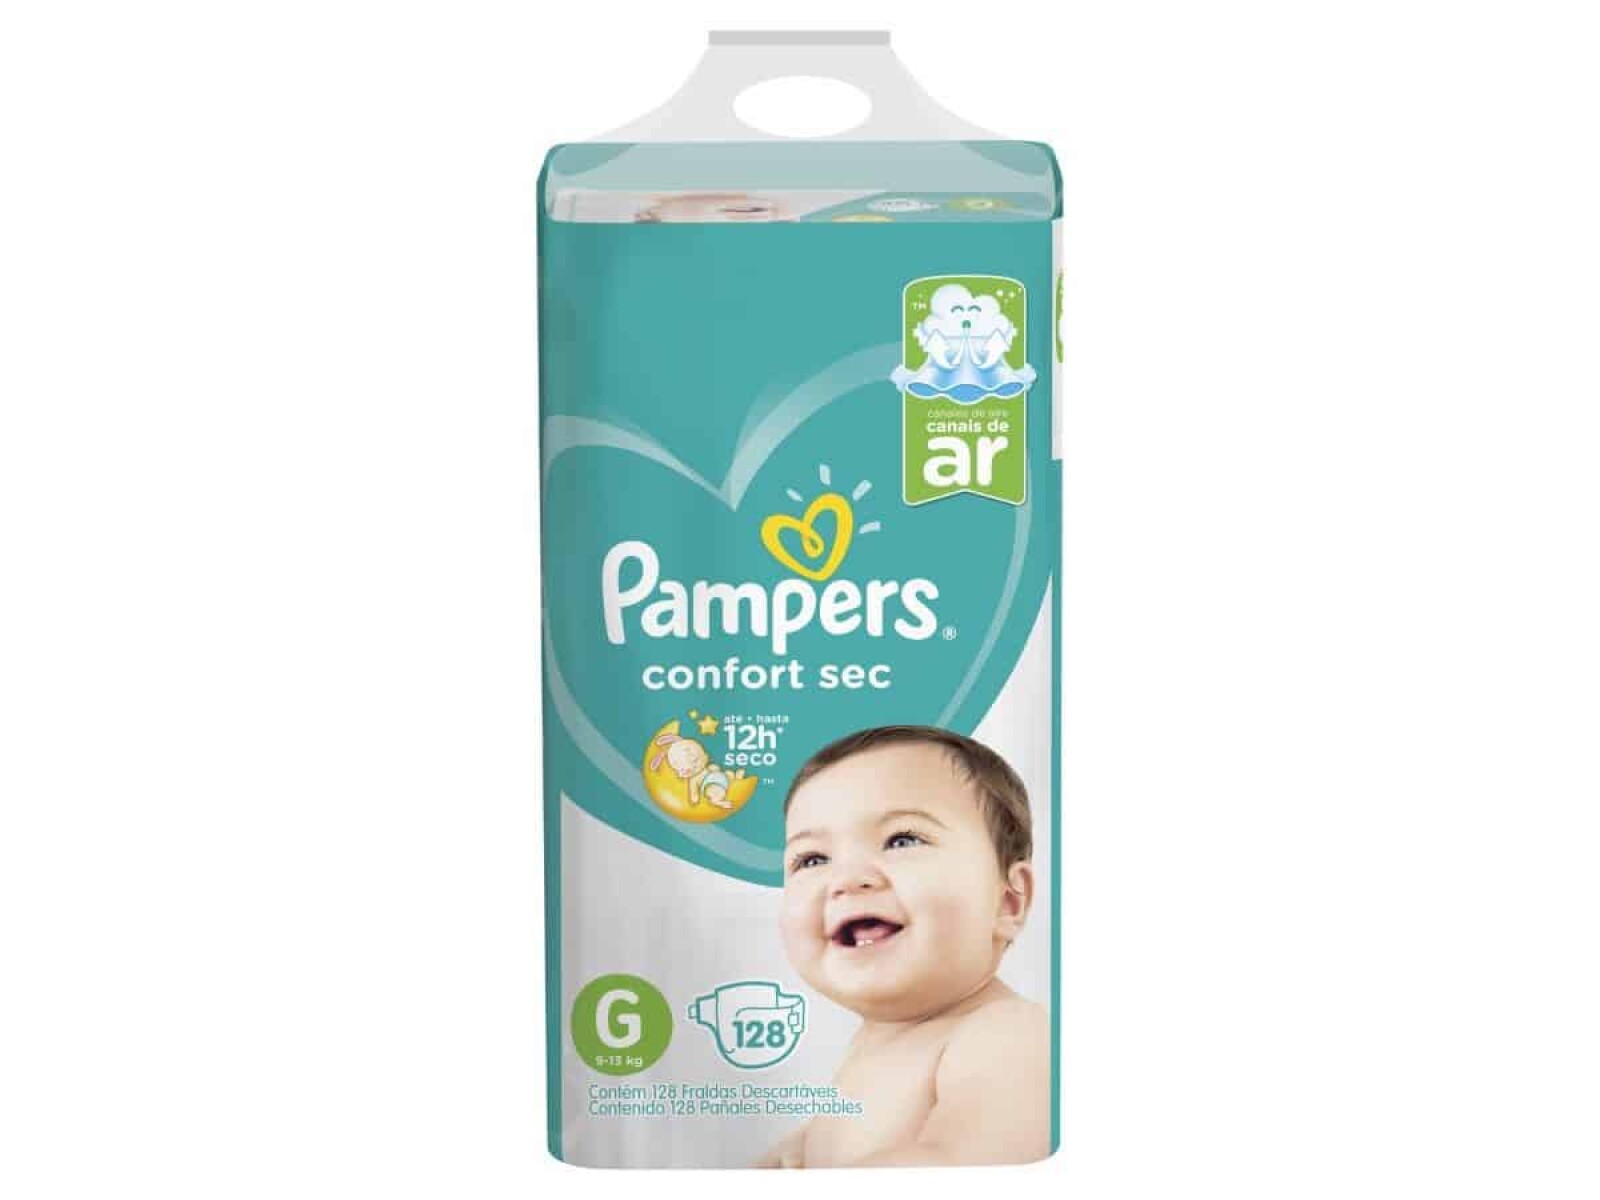 Pañales Pampers Confort Sec G X 128 